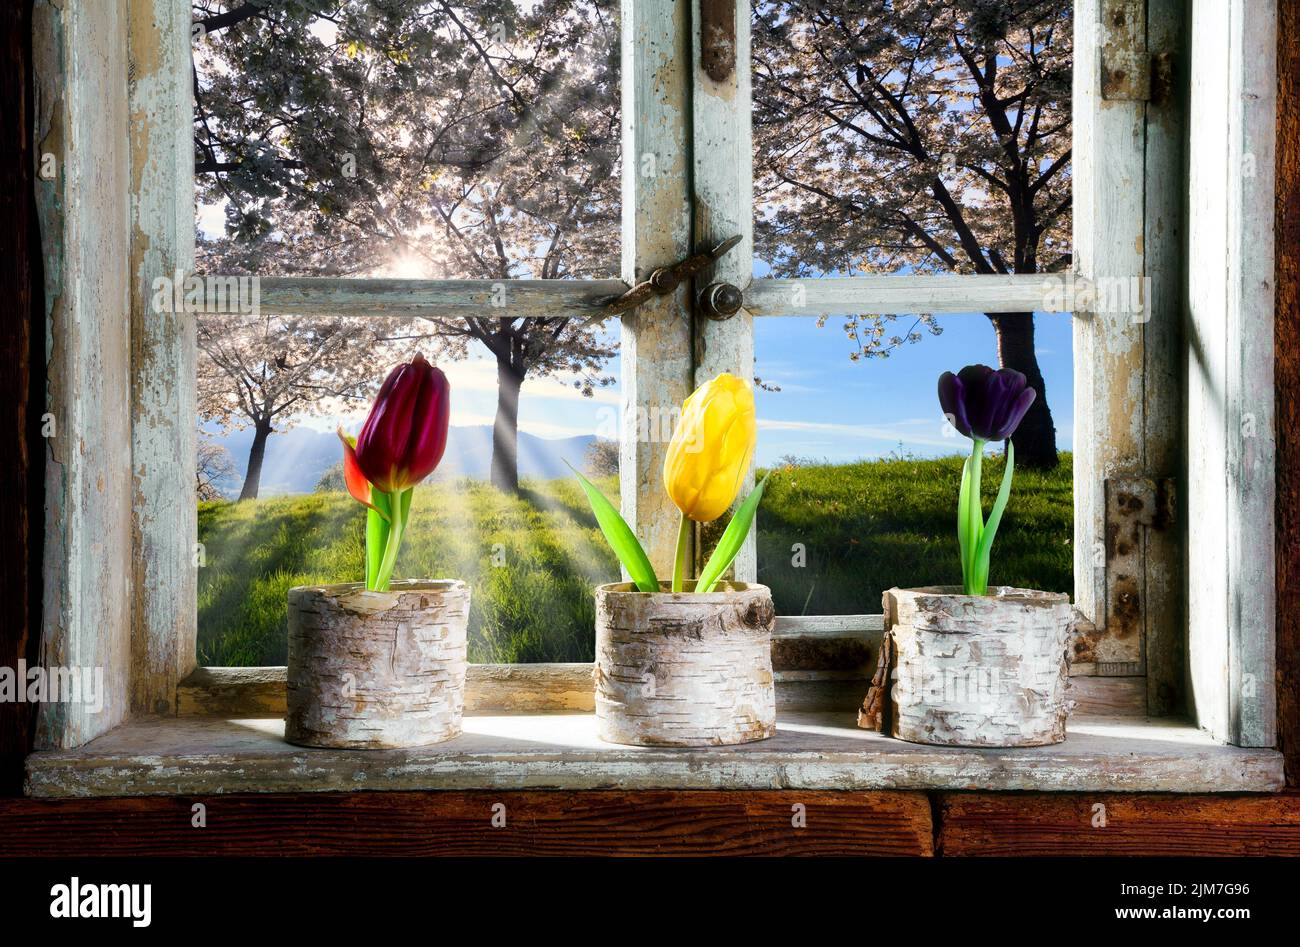 Flower pots with tulips at a window with a view of the landscape Stock Photo